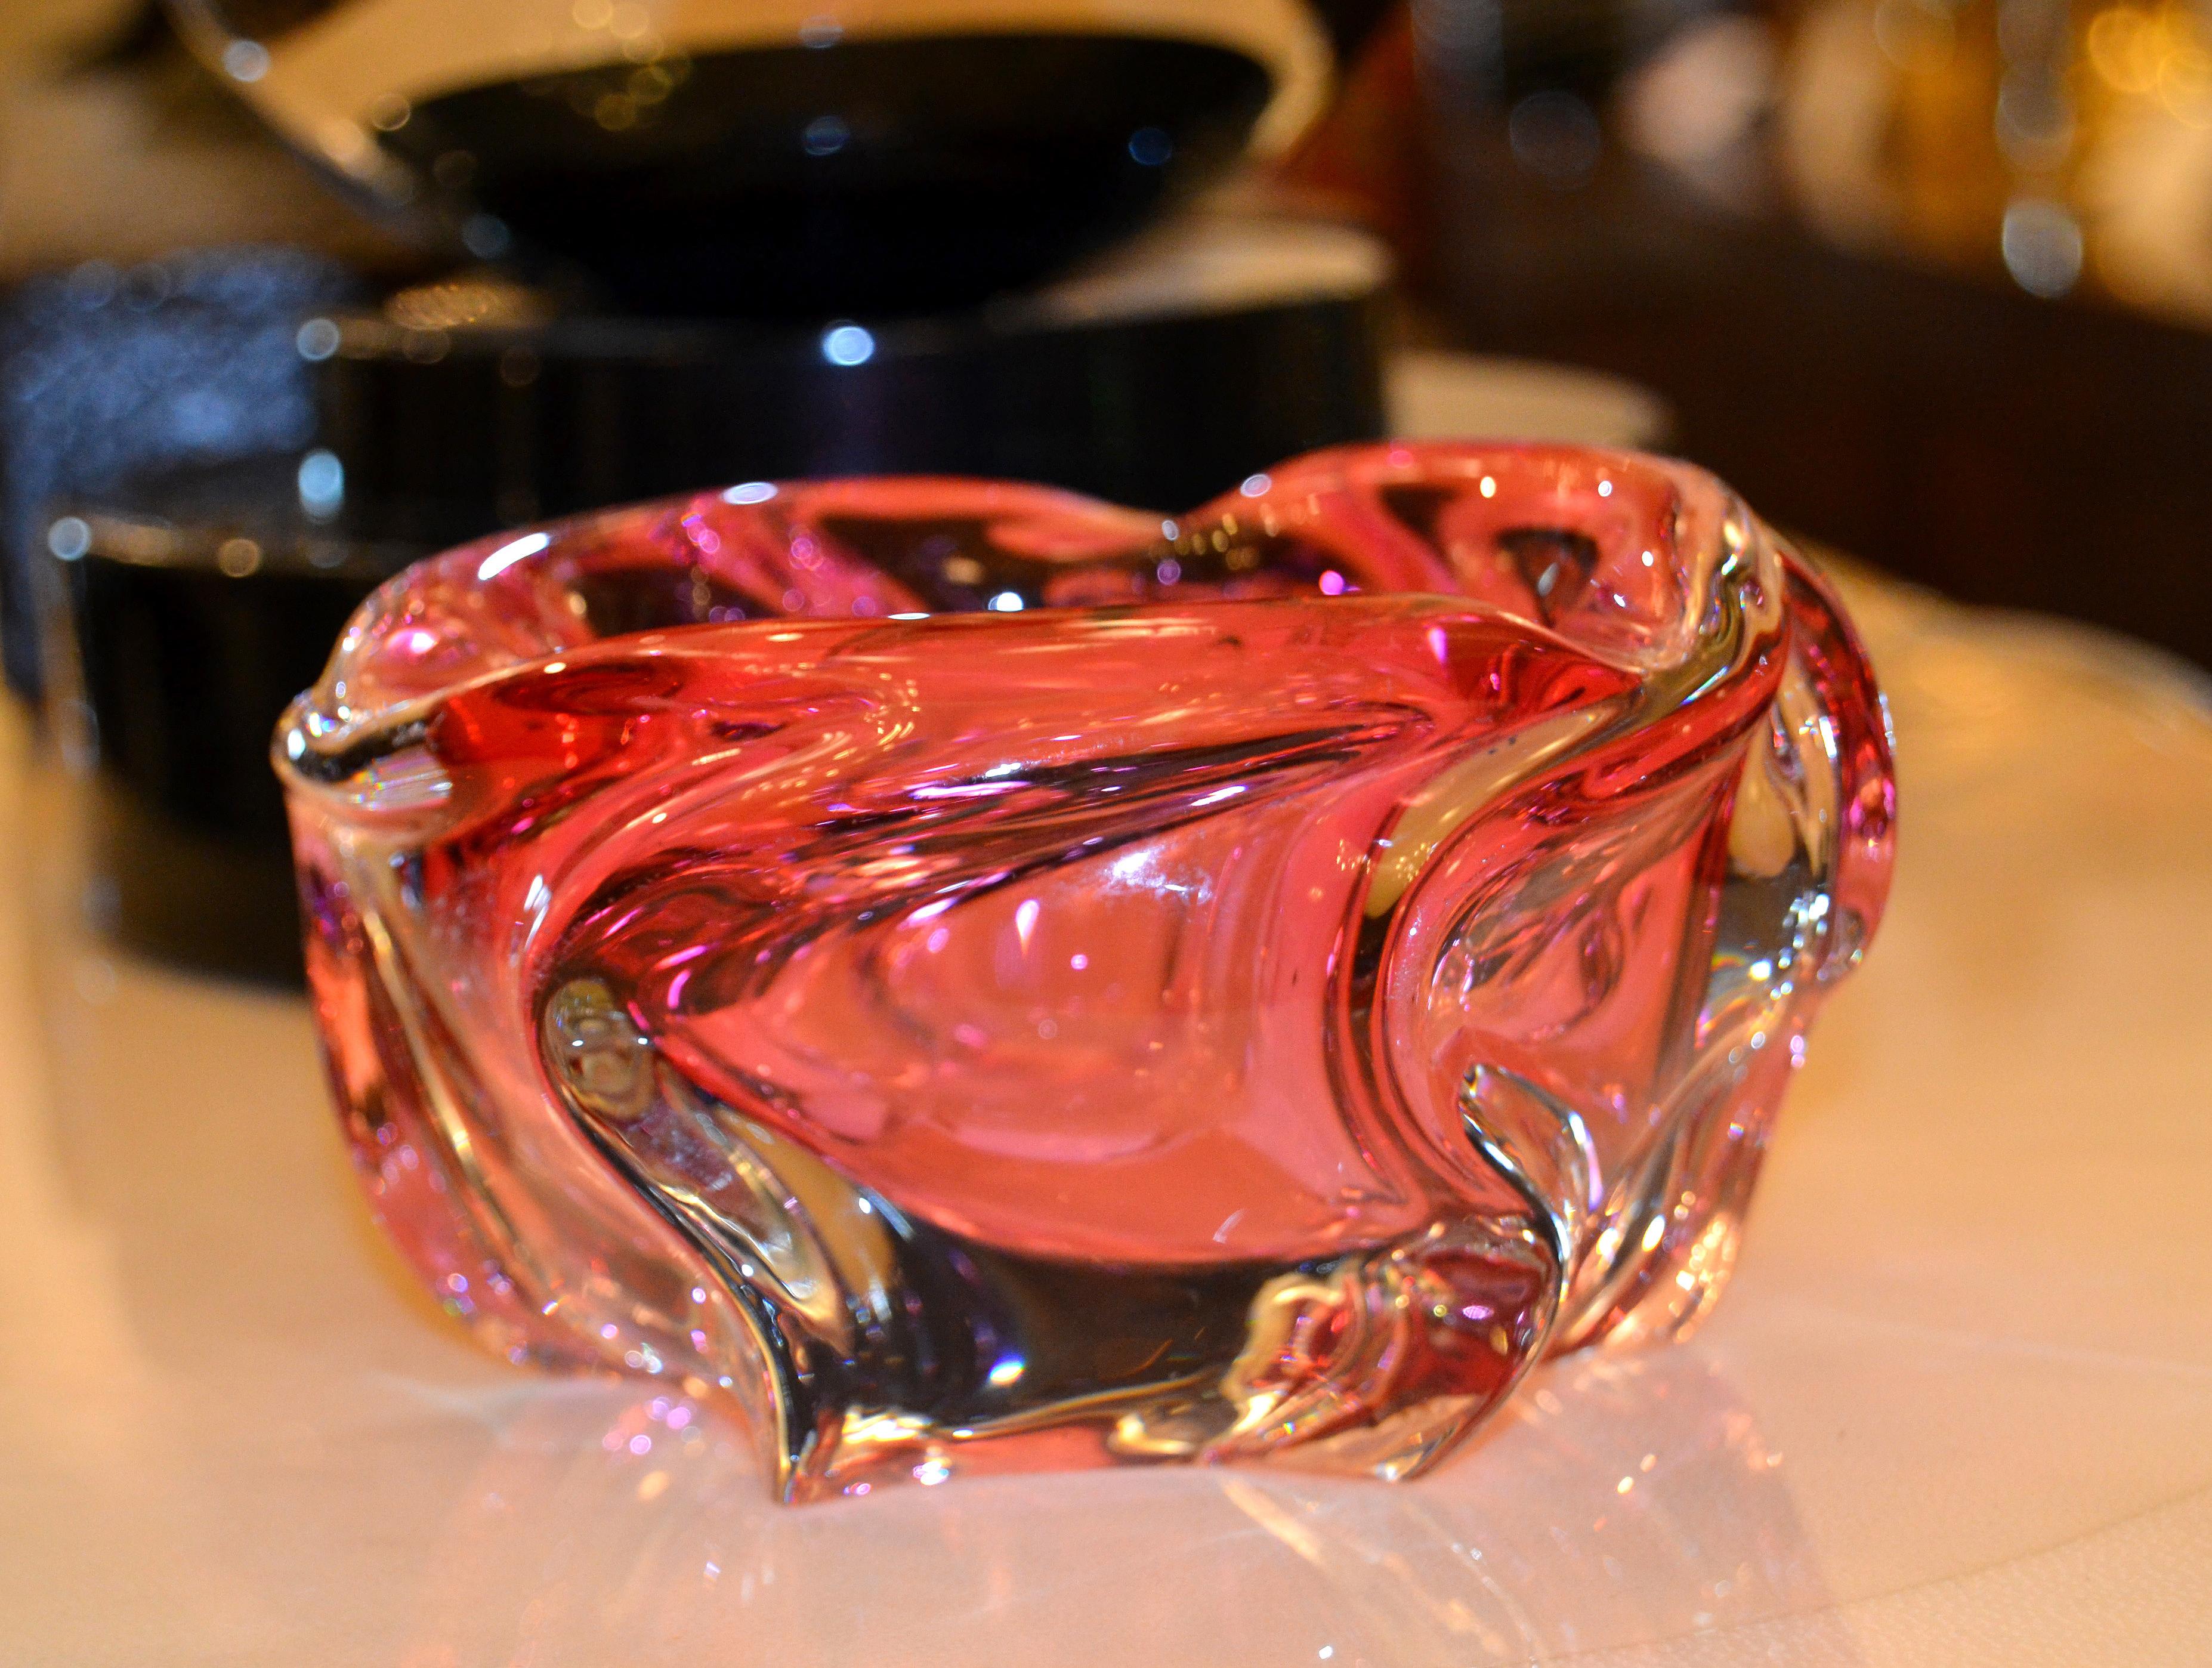 Pink and clear blown Murano art glass catchall, bowl or ashtray made in Italy.
Heavy clear blown glass with pink details.